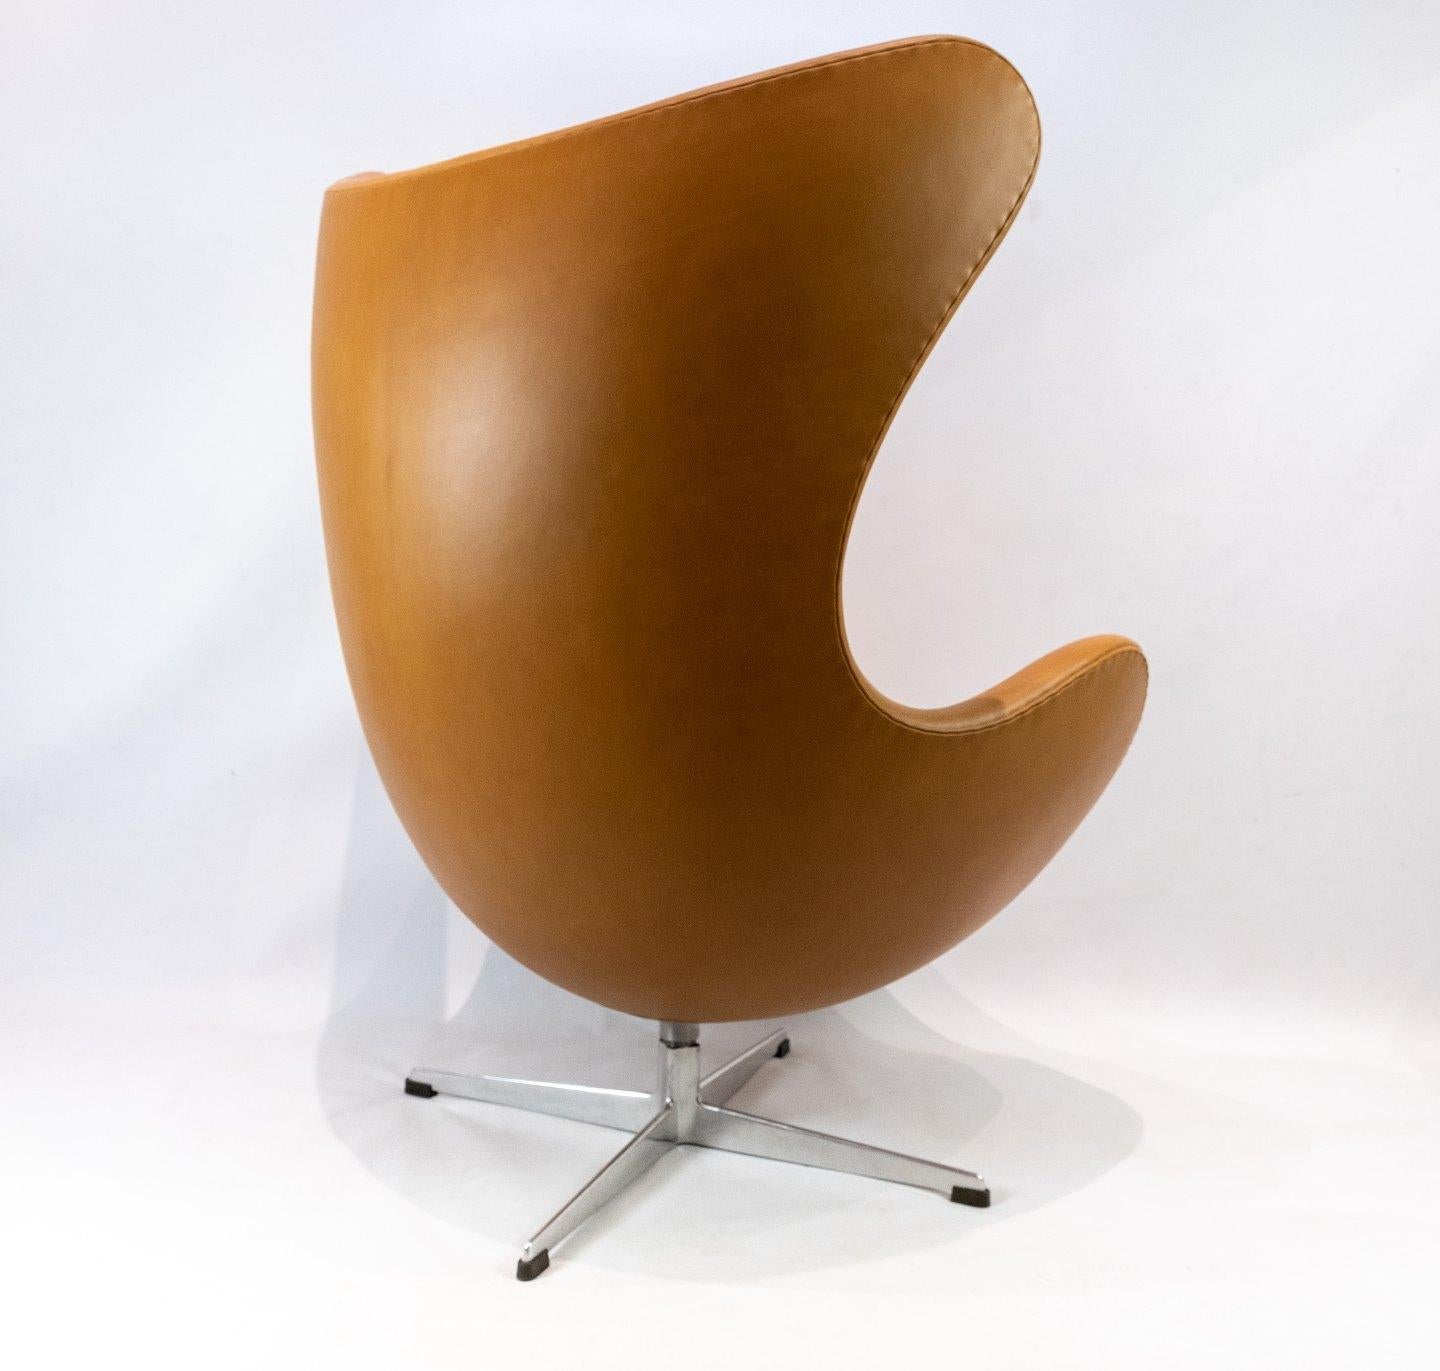 The Egg, model 3316 designed by Arne Jacobsen in 1958 and manufactured by Fritz Hansen. The chair is upholstered in cognac colored leather and is in great condition.
Measures: H - 107 cm, W - 86 cm, D - 73 cm and SH - 37 cm.